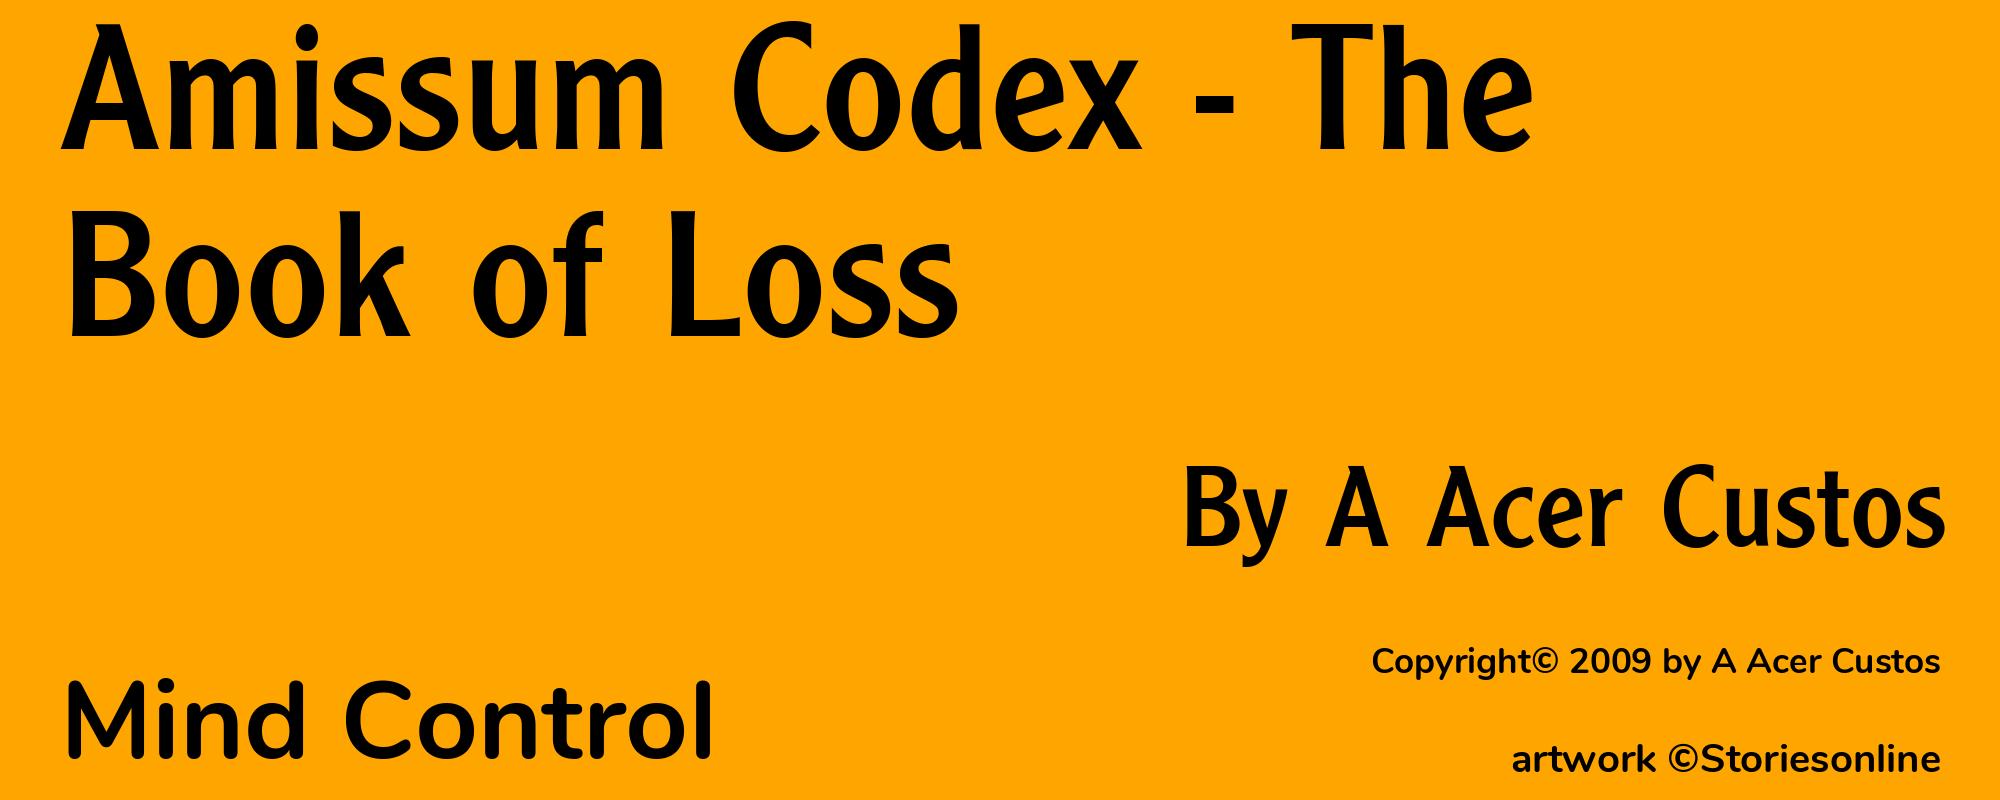 Amissum Codex - The Book of Loss - Cover